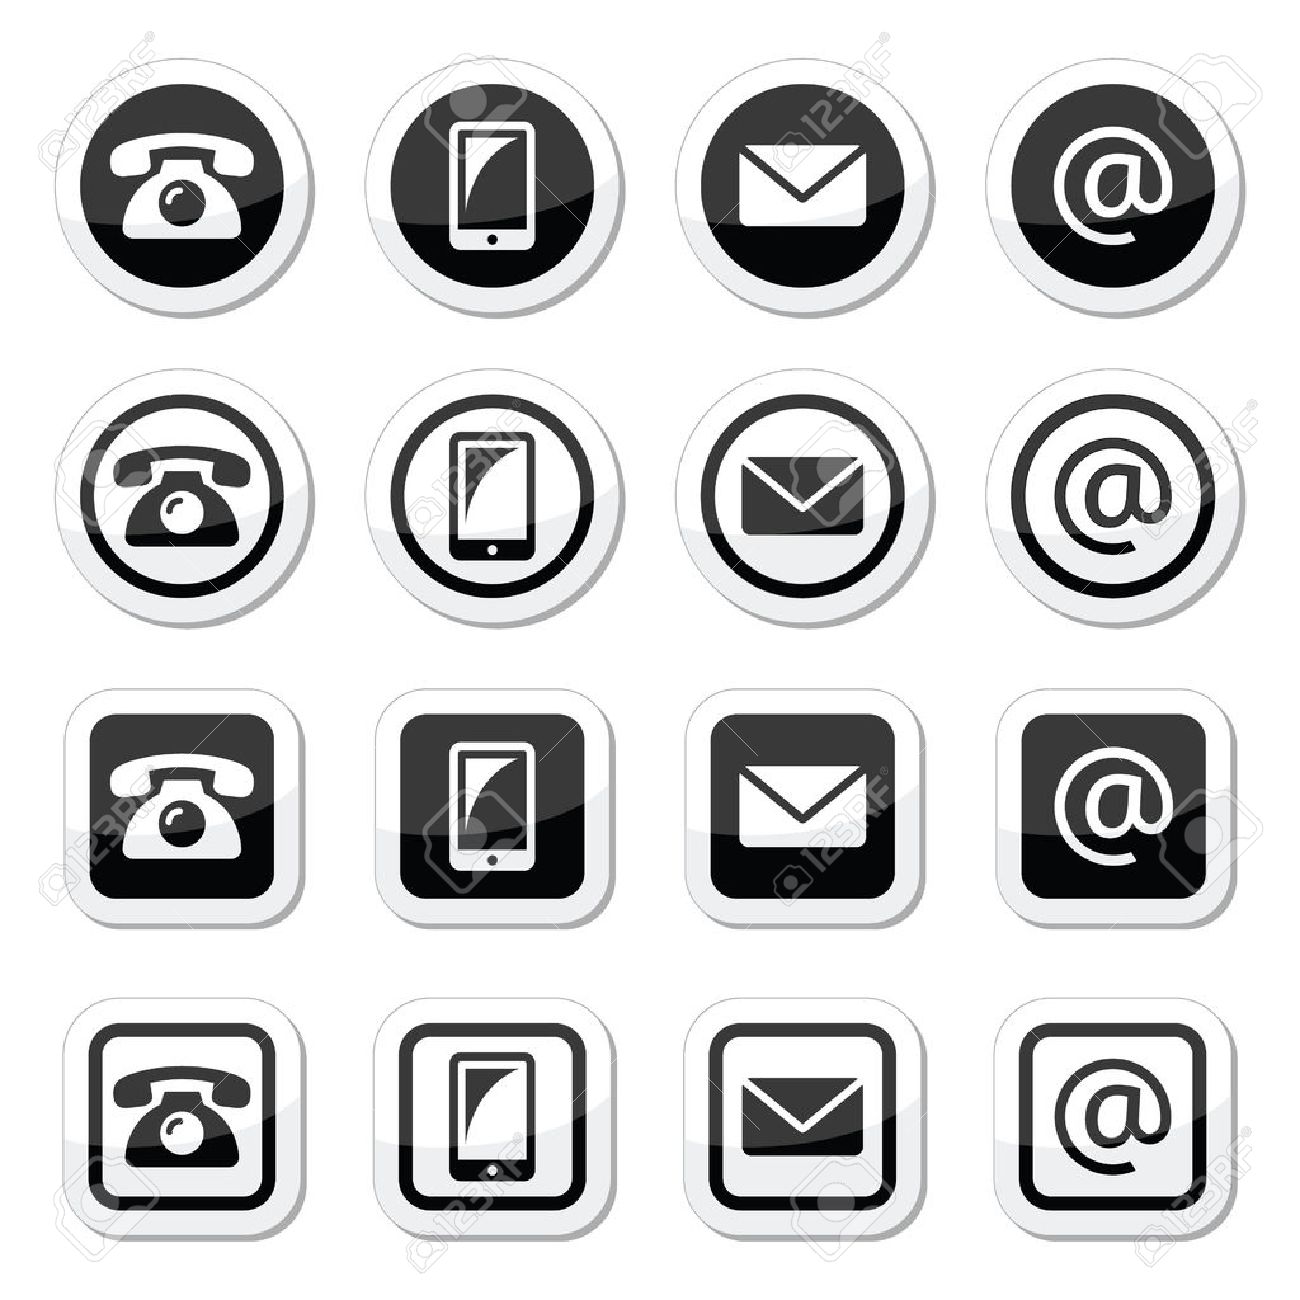 Mobile application icons by Souvik Bhattacharjee | Phone icon 